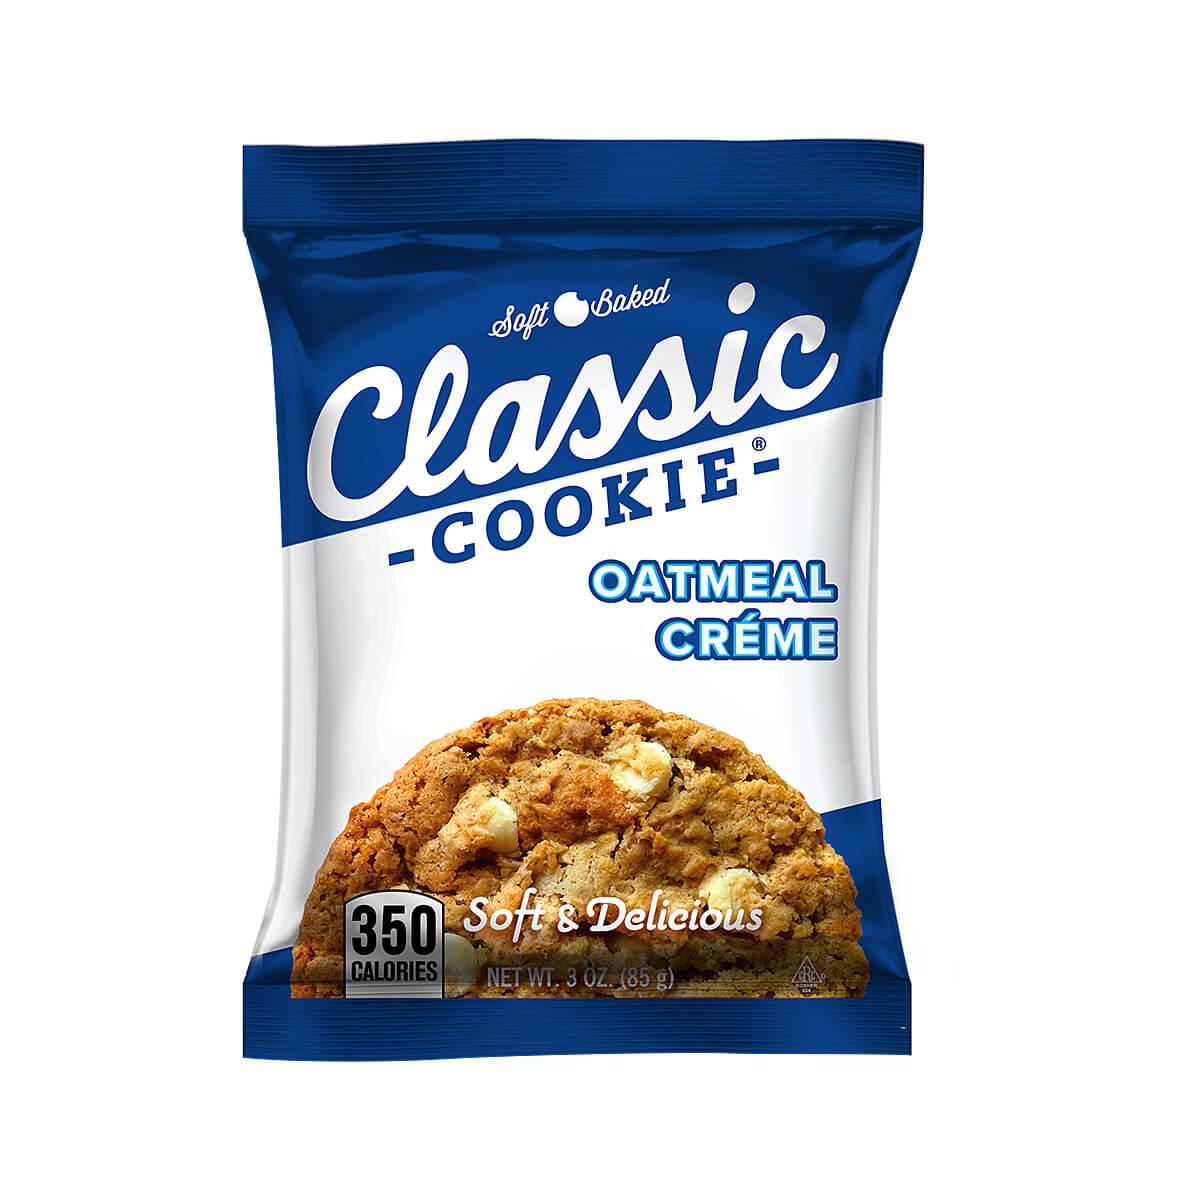  Soft Baked Oatmeal Creme Cookie